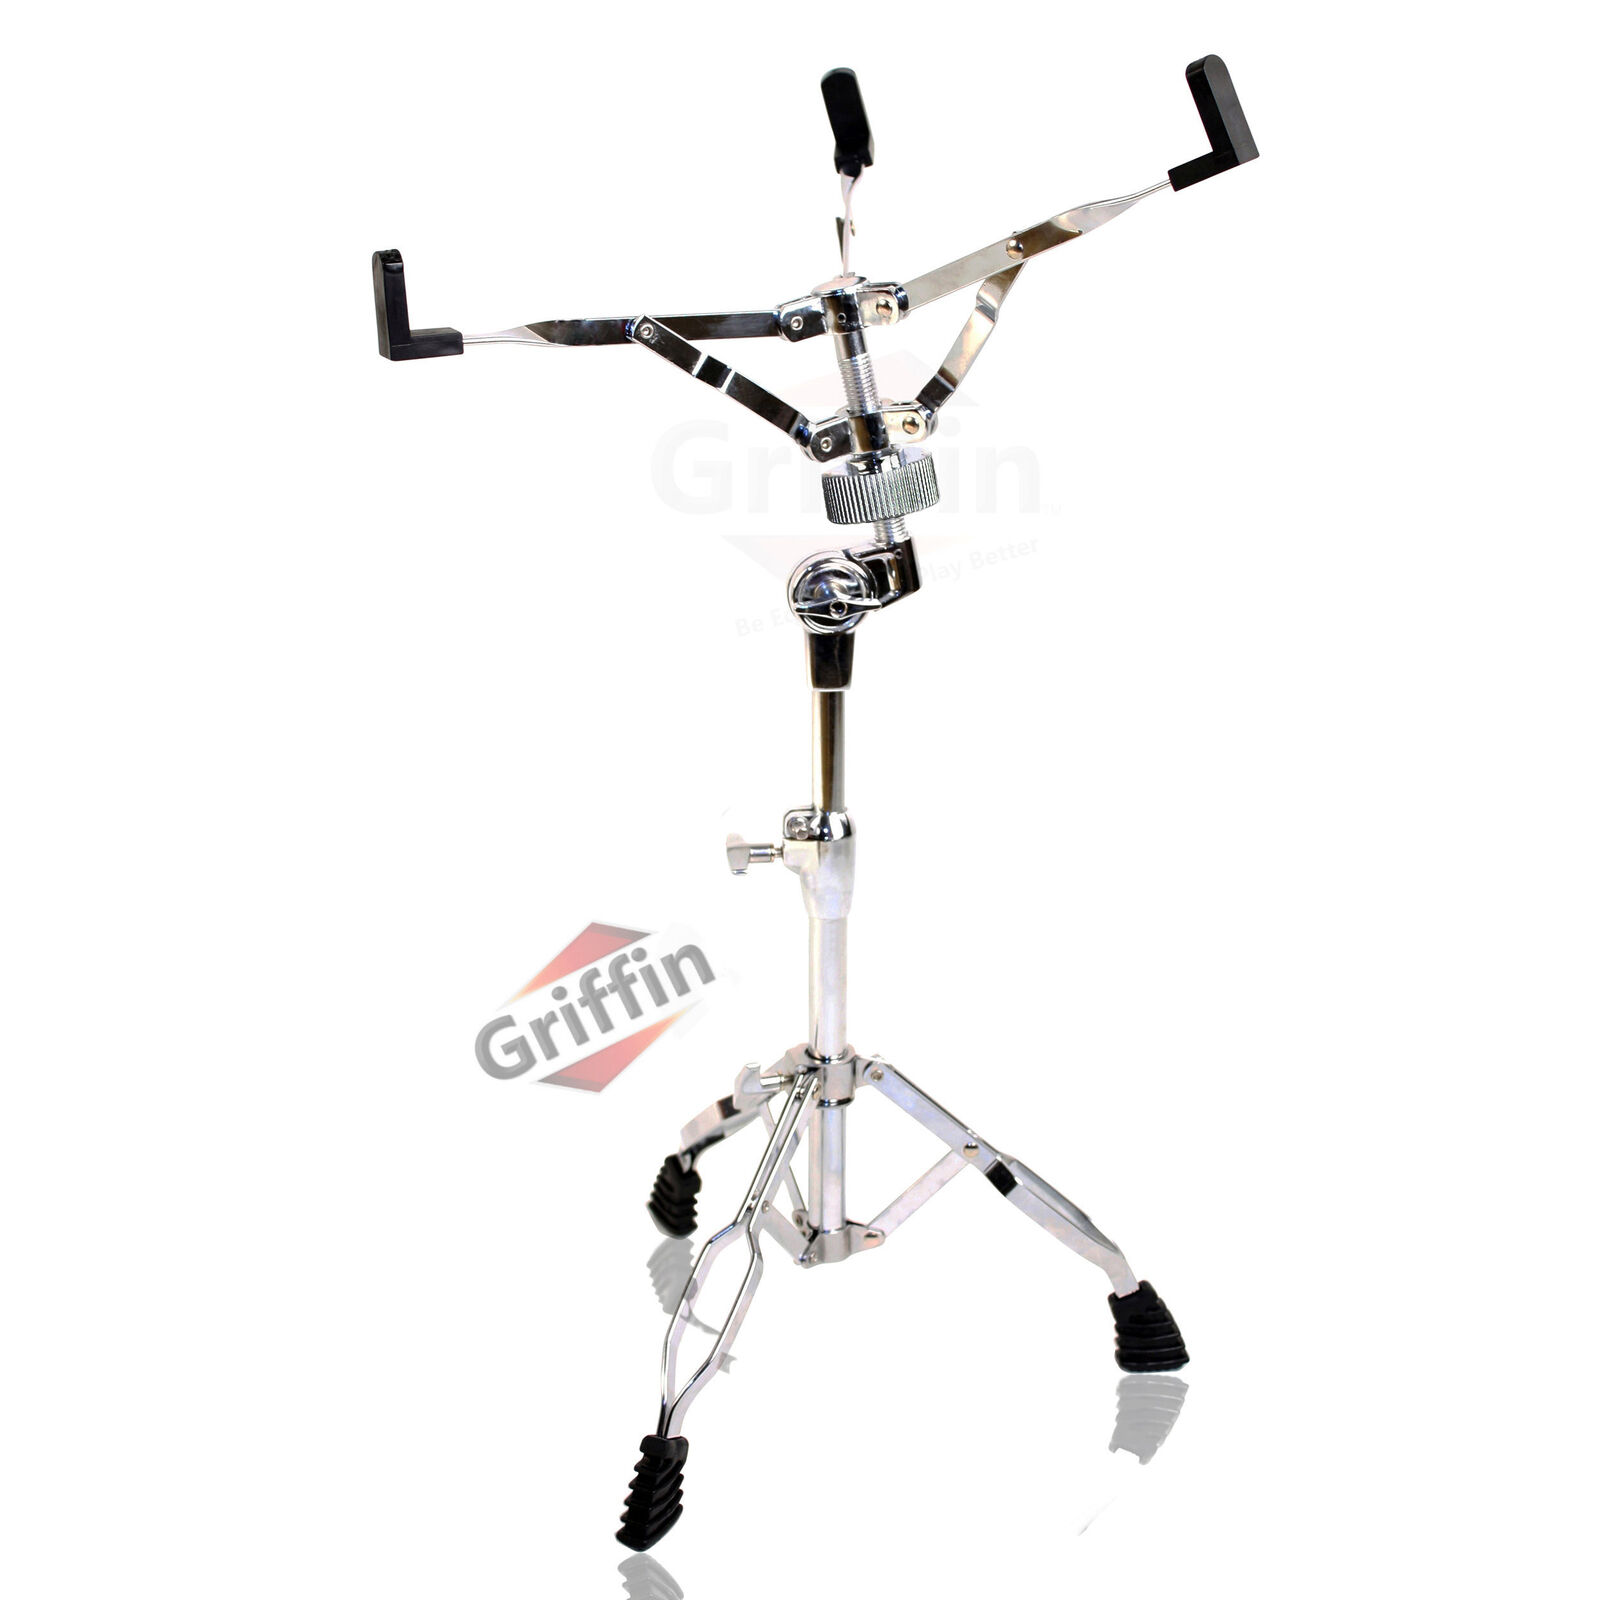 Snare Drum Stand - GRIFFIN Percussion Hardware Tom Holder Practice Pad Mount Key